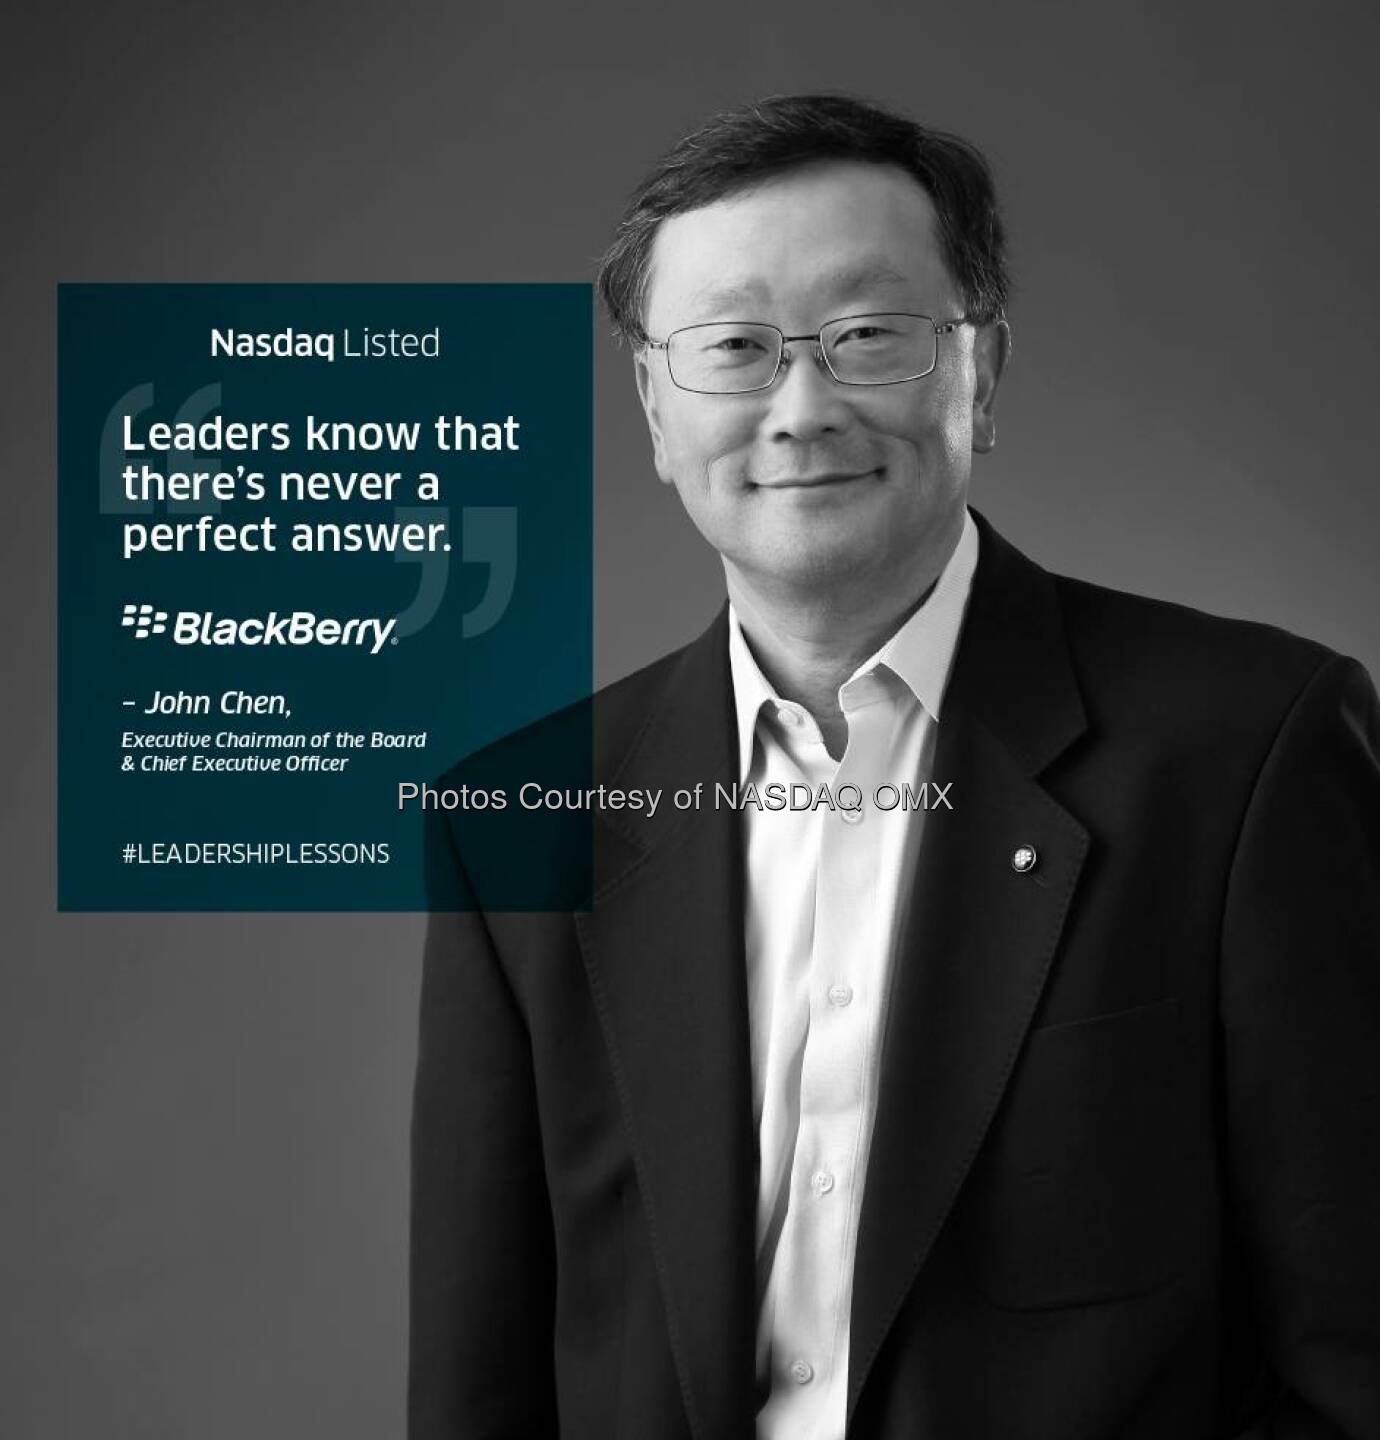 #LeadershipLessons from John Chen, Executive Chairman of the Board & Chief Executive Officer of BlackBerry #NasdaqListed $BBRY  Source: http://facebook.com/NASDAQ